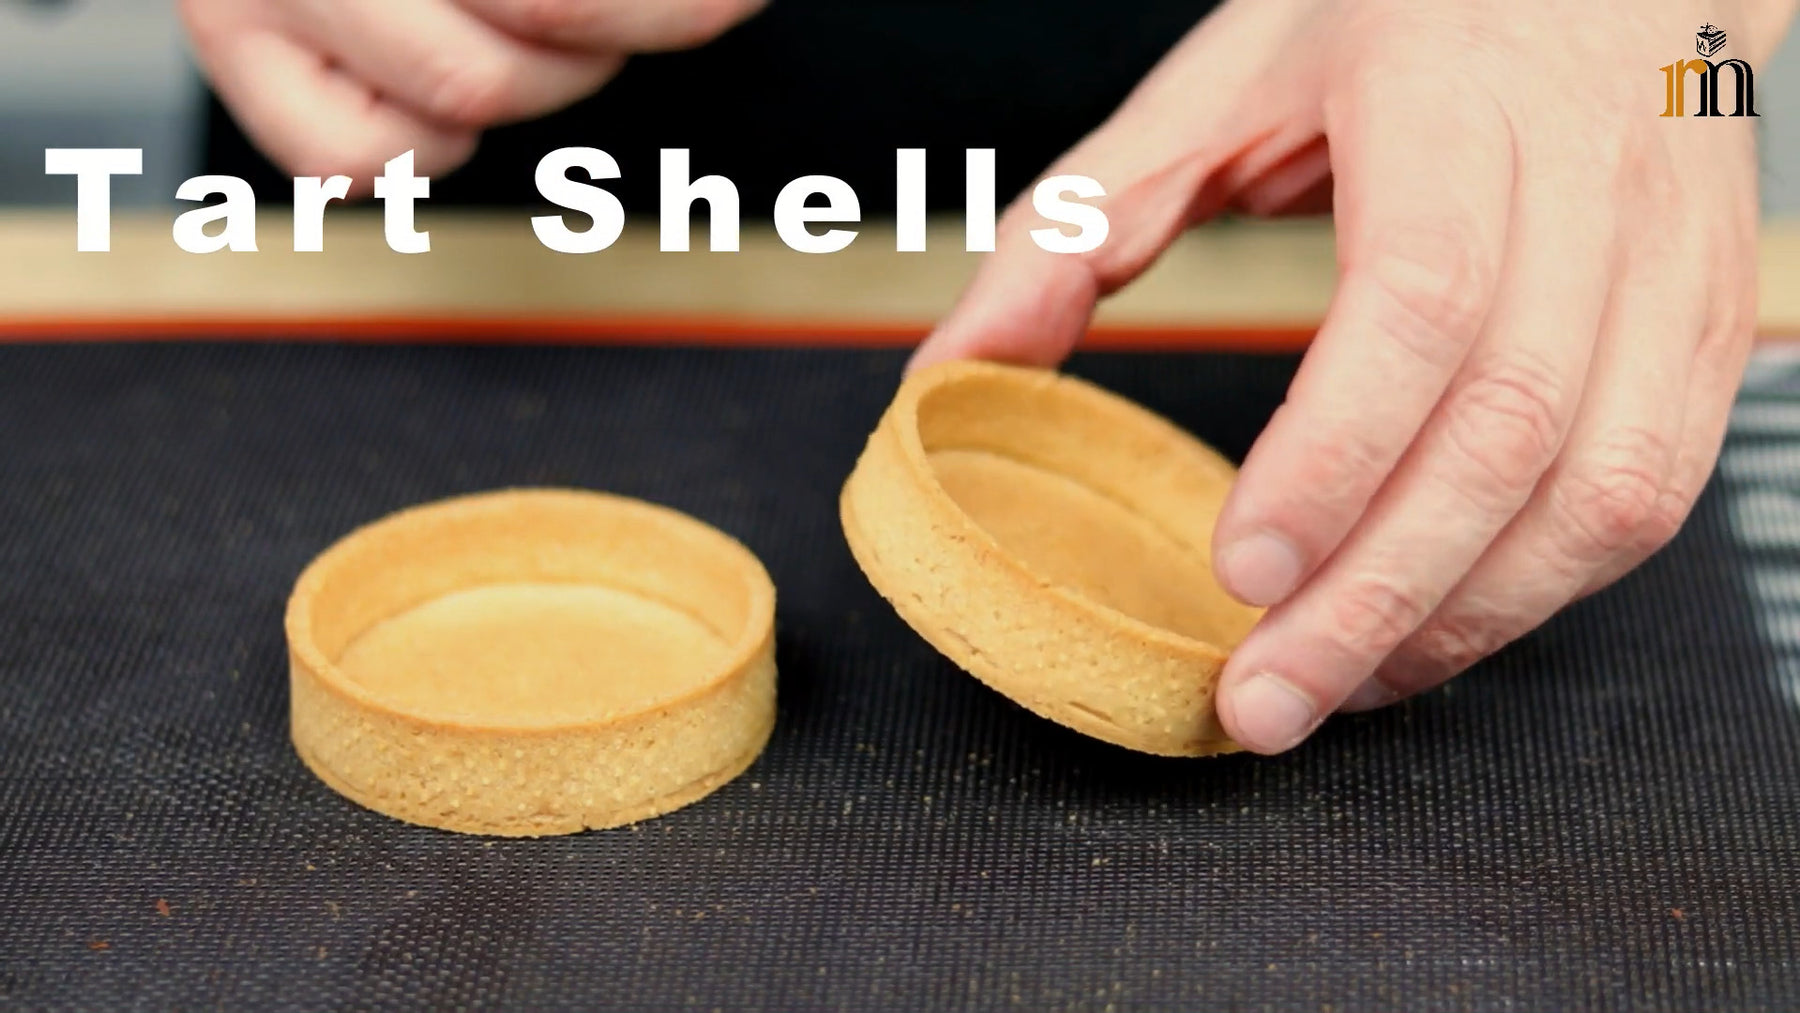 HOW TO MAKE THE BEST TART SHELLS